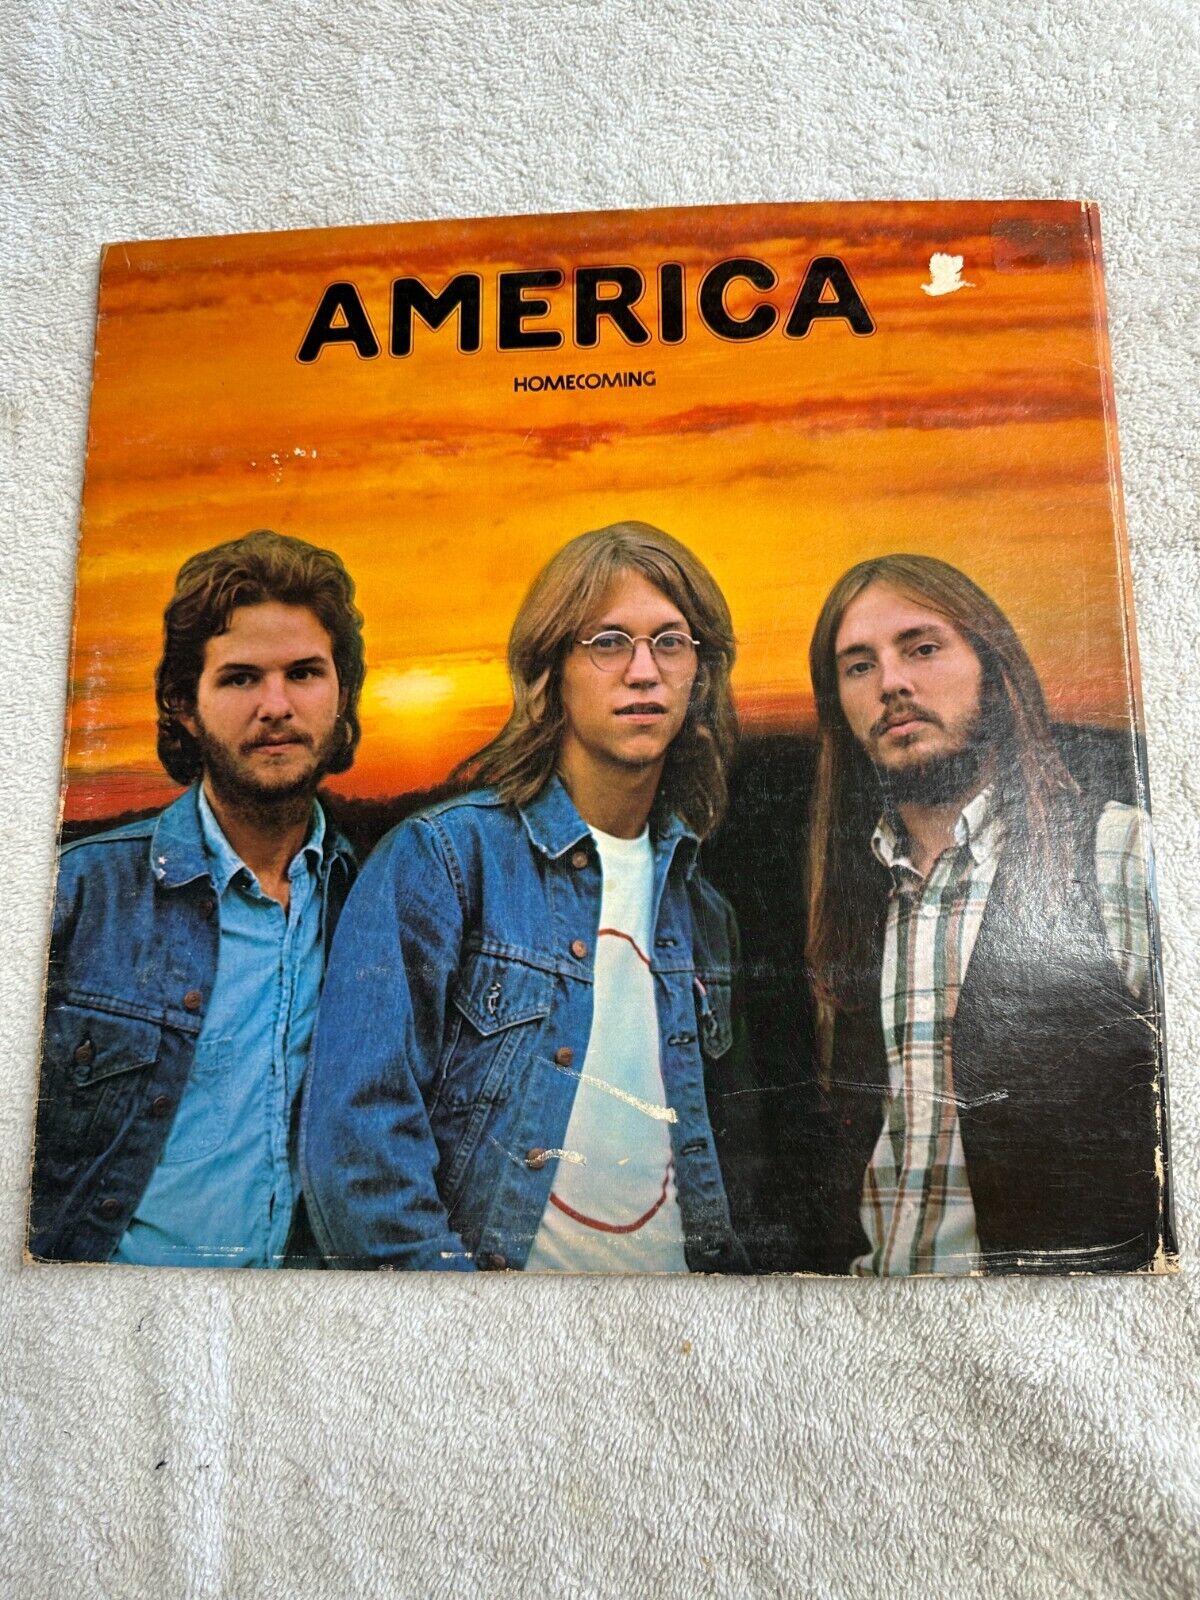 AMERICA,  " HOMECOMING " ,  CLASSIC  AMERICA, FOLKROCK COLLECTIBLE,  good